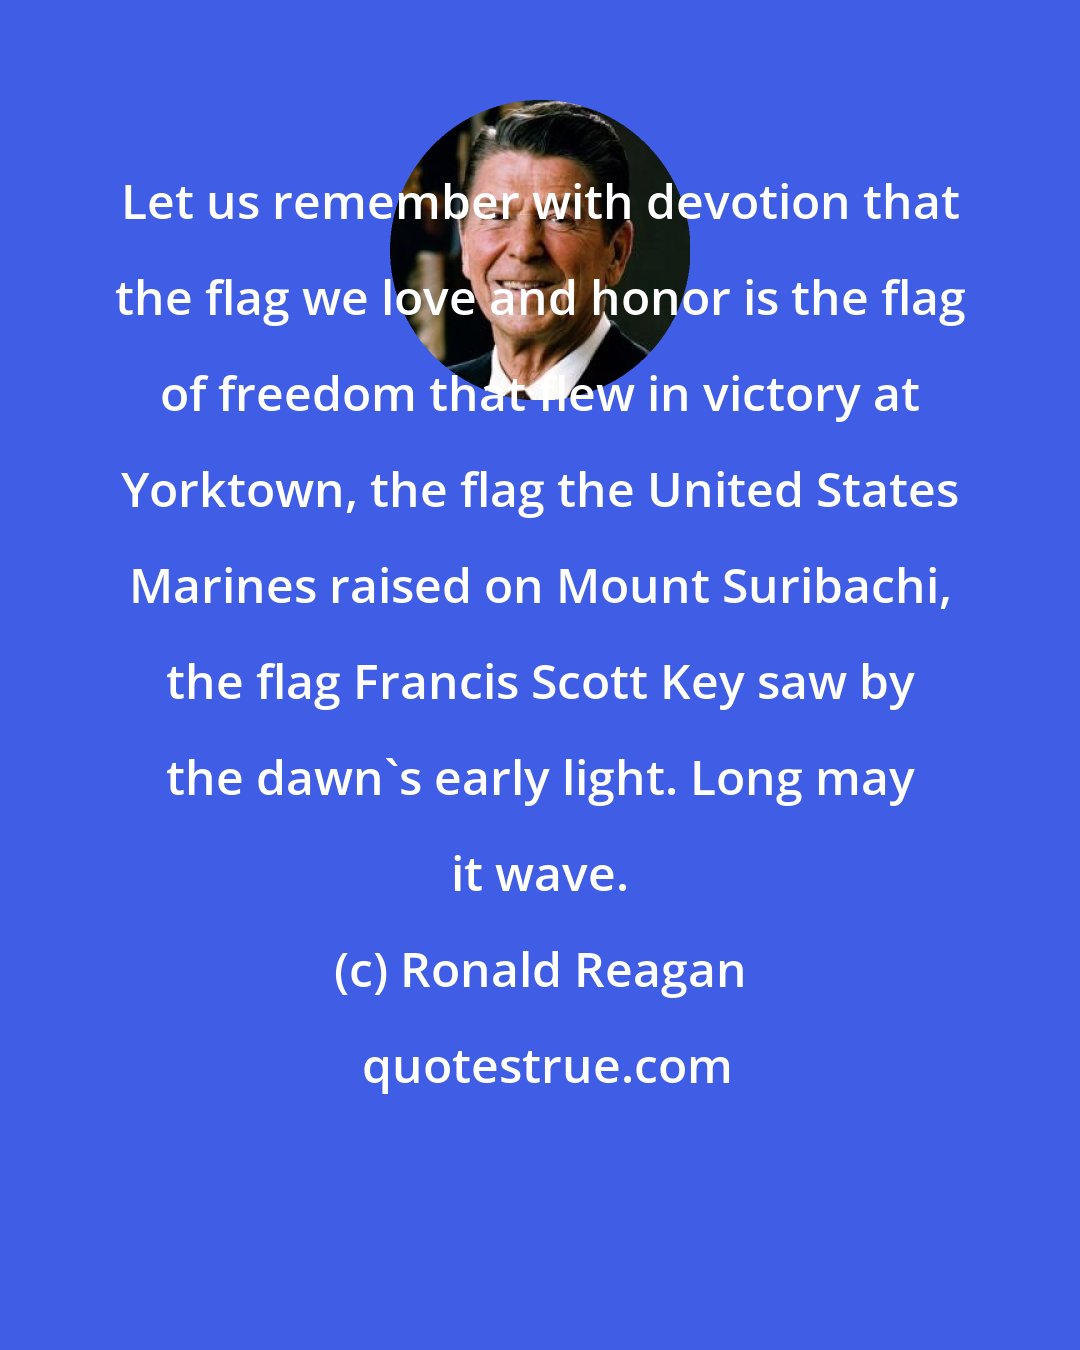 Ronald Reagan: Let us remember with devotion that the flag we love and honor is the flag of freedom that flew in victory at Yorktown, the flag the United States Marines raised on Mount Suribachi, the flag Francis Scott Key saw by the dawn's early light. Long may it wave.